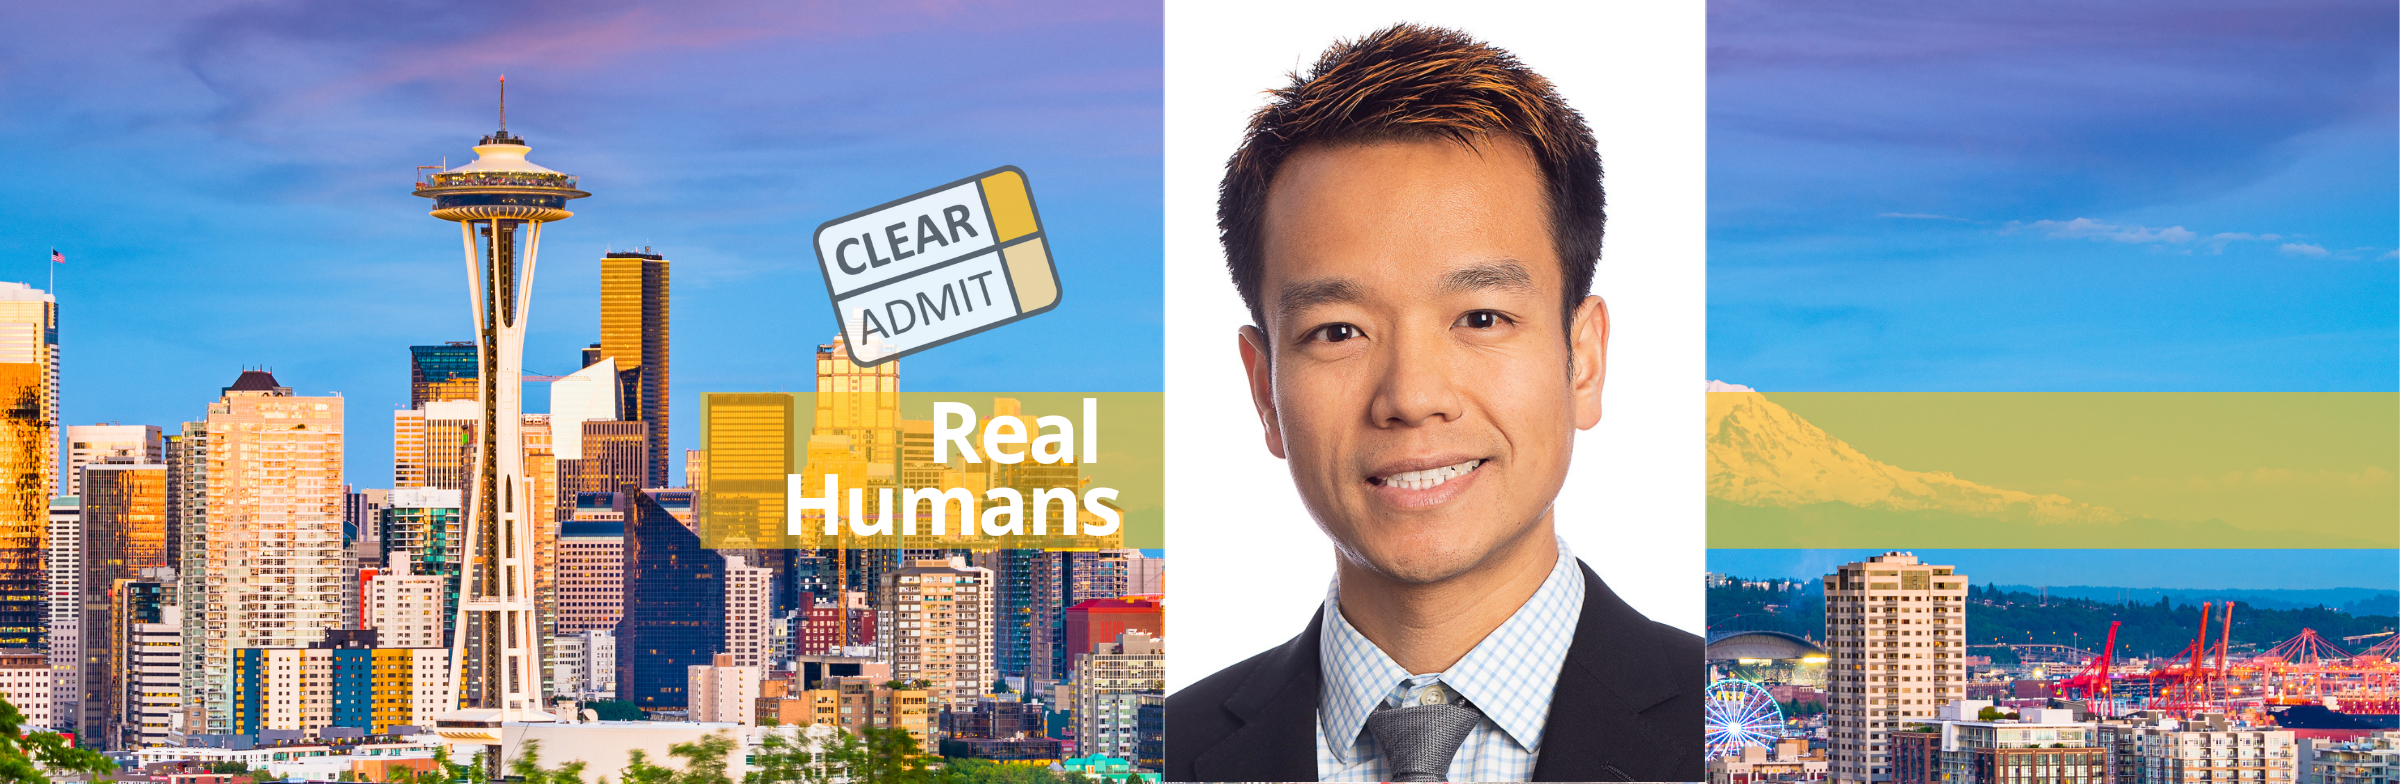 Image for Real Humans of Accenture: Khoa Pham, Washington Foster MBA ’21, Technology Strategy Manager